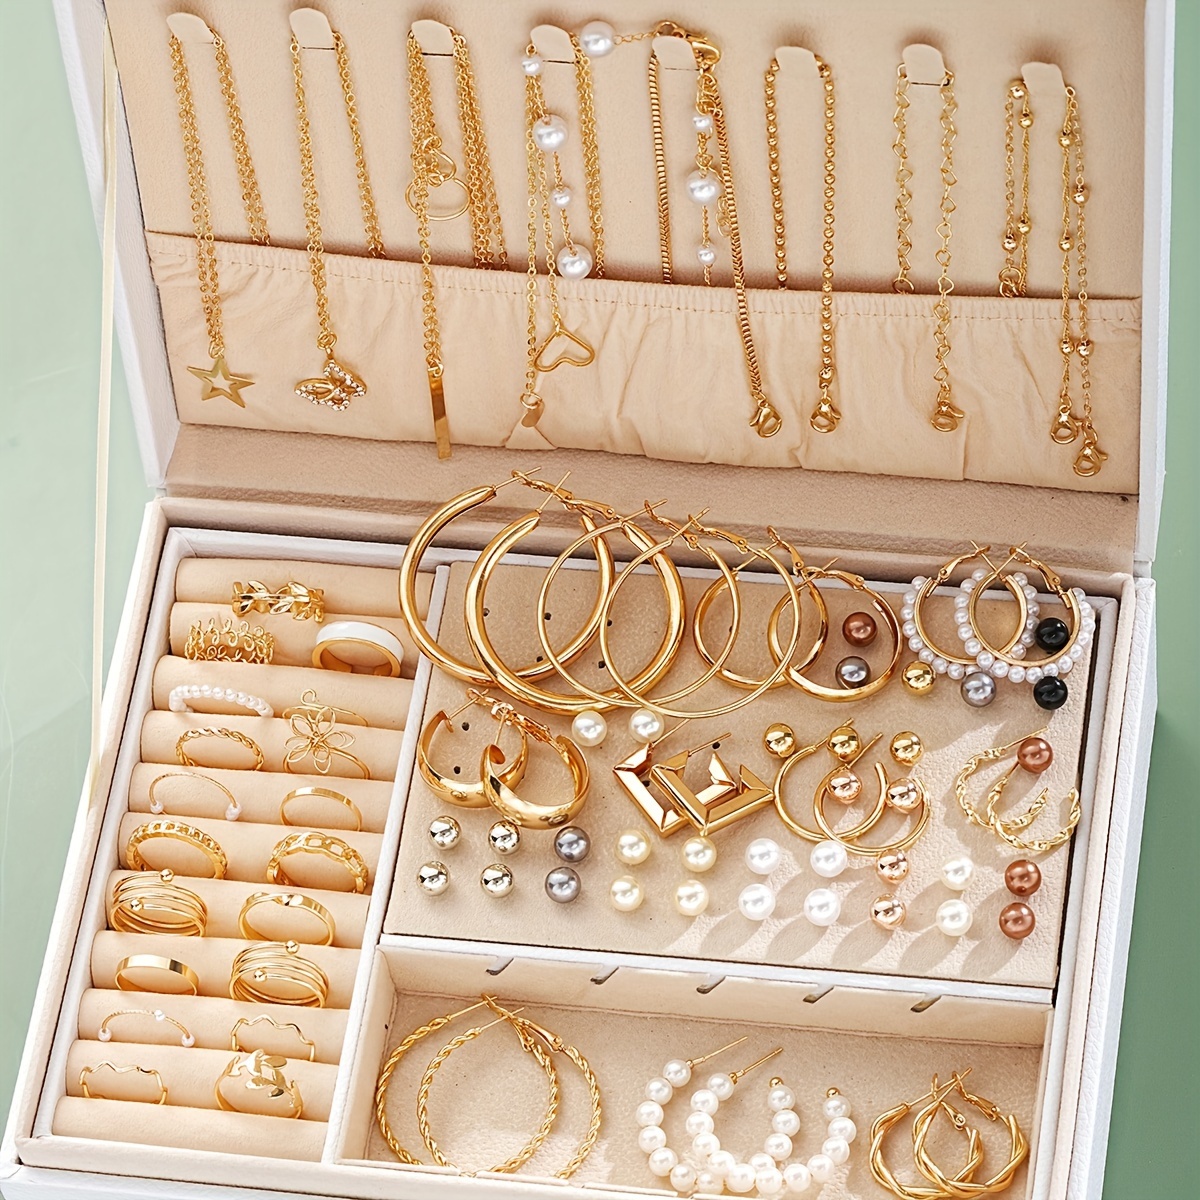 

91-piece Fashion Ladies Jewelry Set With Golden Hoop Earrings, Simple Studs, Vintage Floral Stackable Rings, Rhinestone Butterfly Pendants, Heart Charm Bracelets For Daily